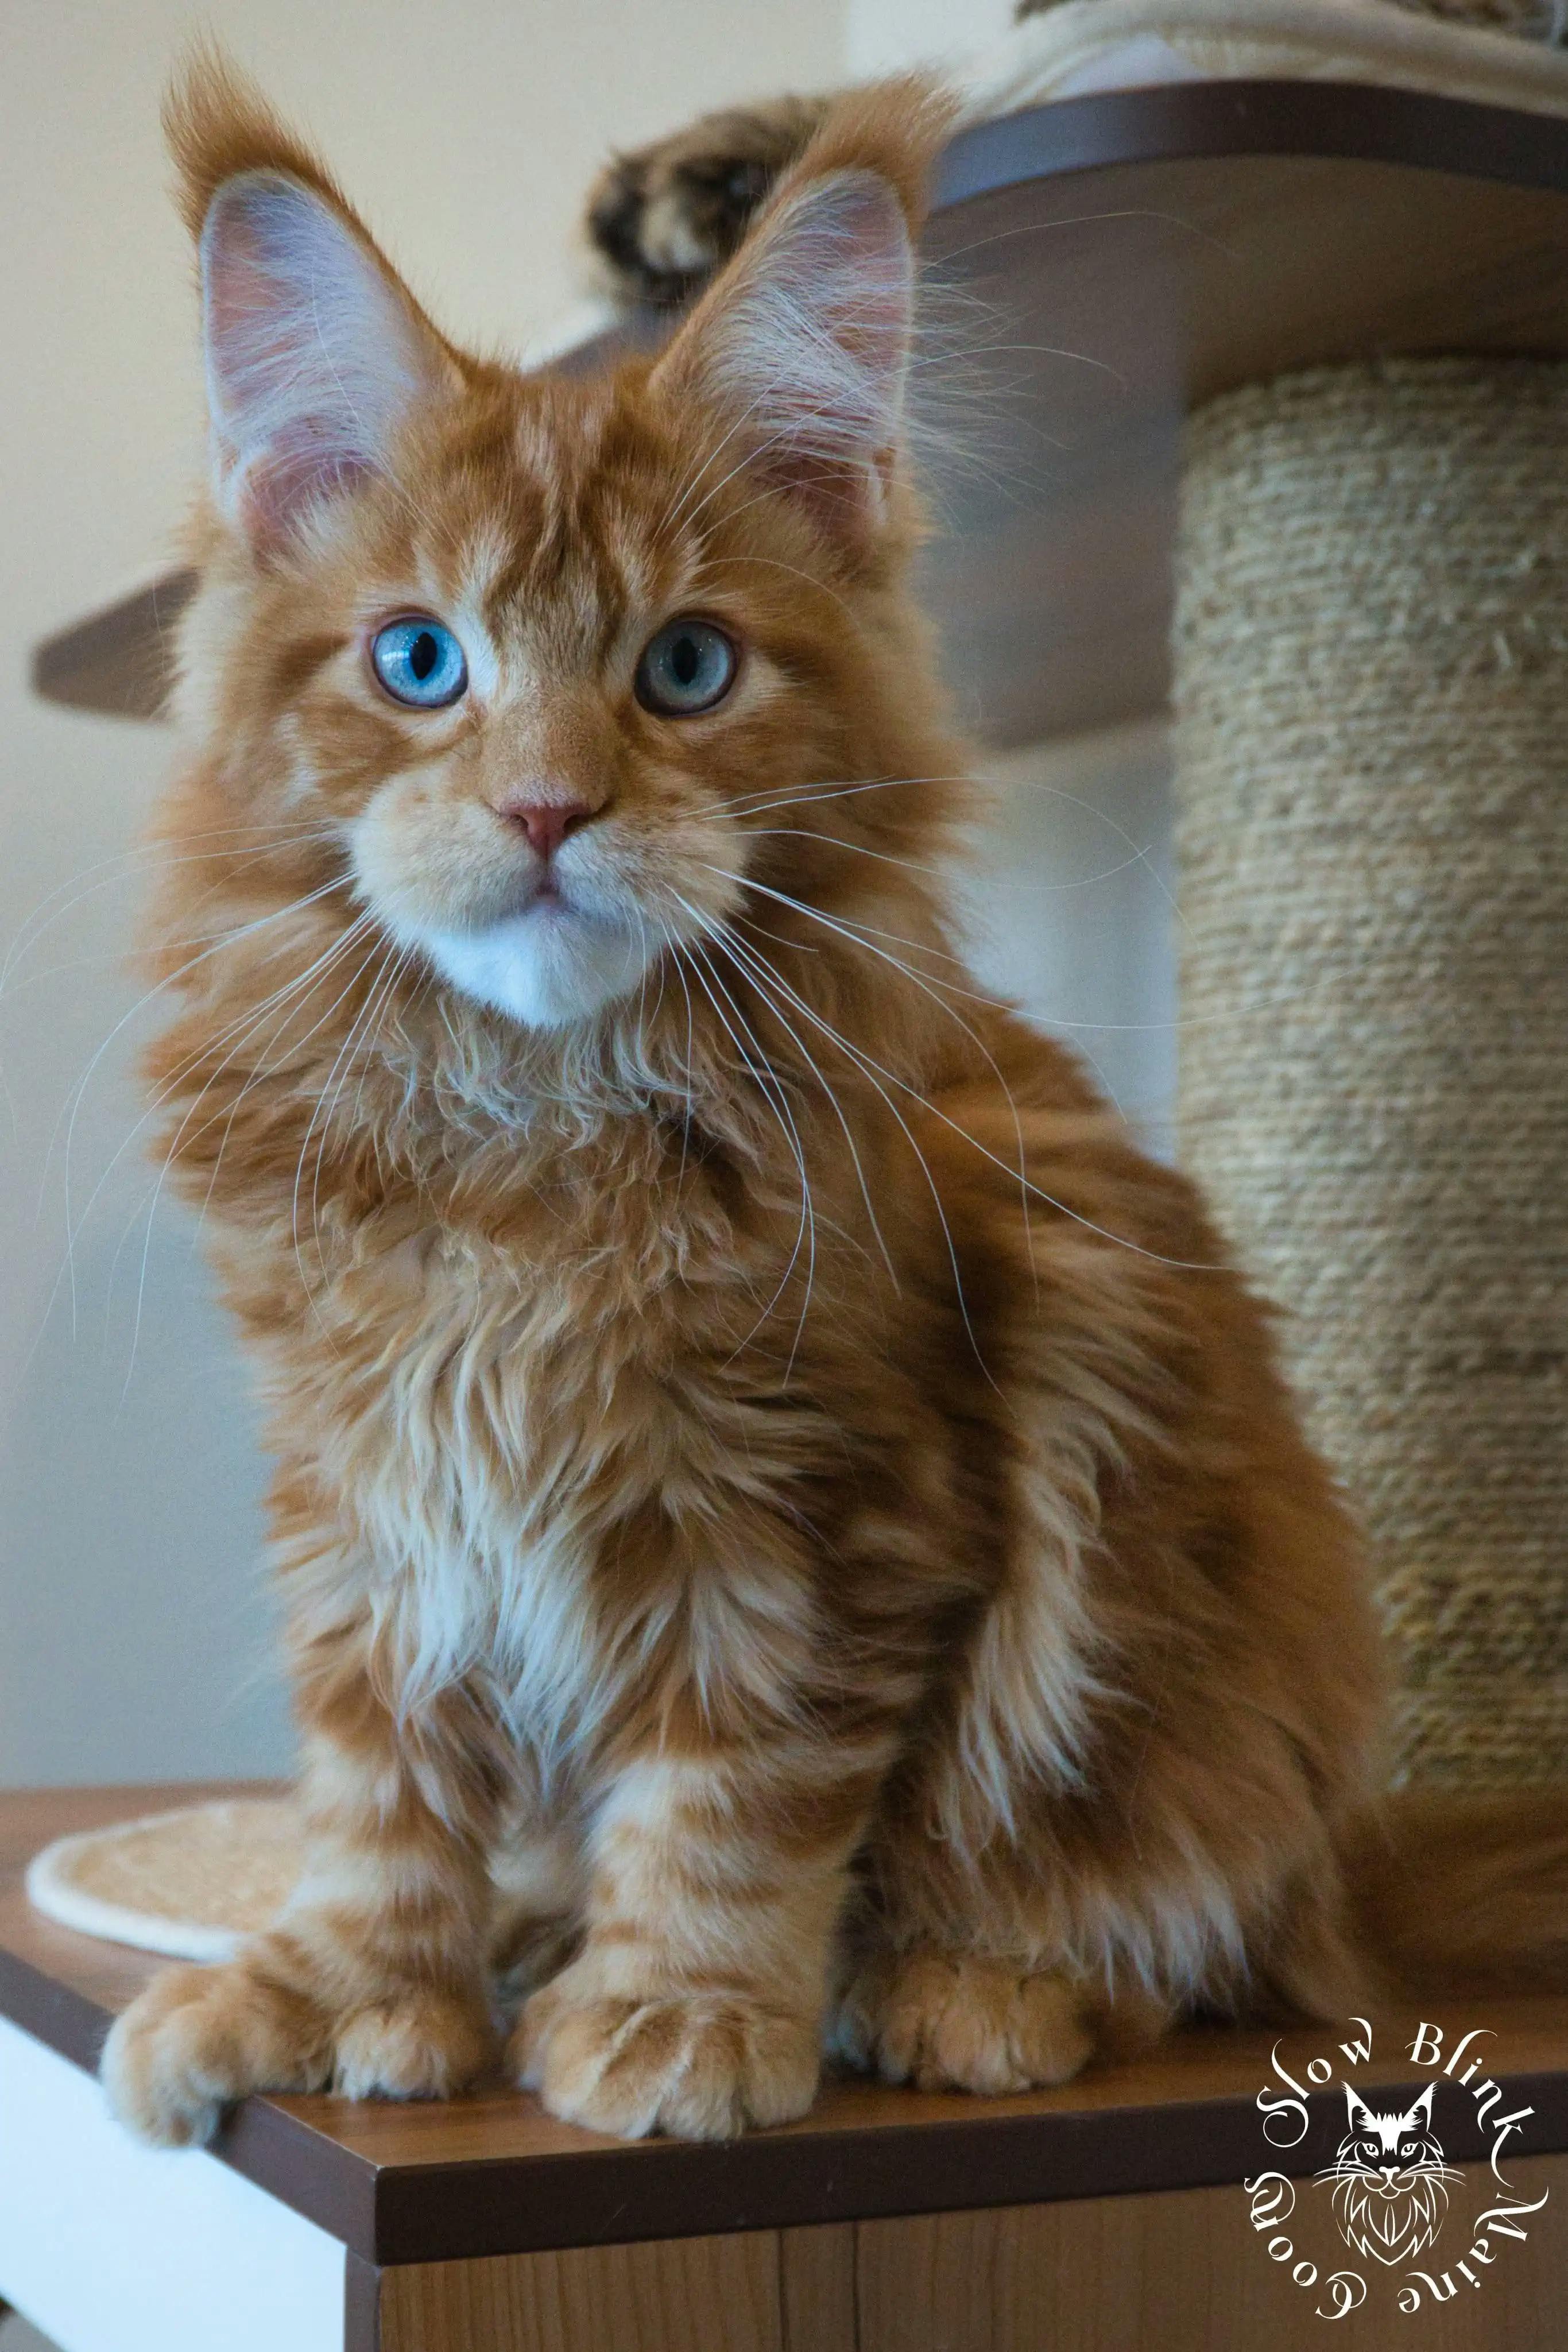 Adult Maine Coon Cat from SlowBlinkMaineCoons > a plus apollo | poly | red smoke | blue eyed dbe | huge ear tufts maine coon king | ems code ds 22 61 | slow blink maine coons | 6 months old | 1